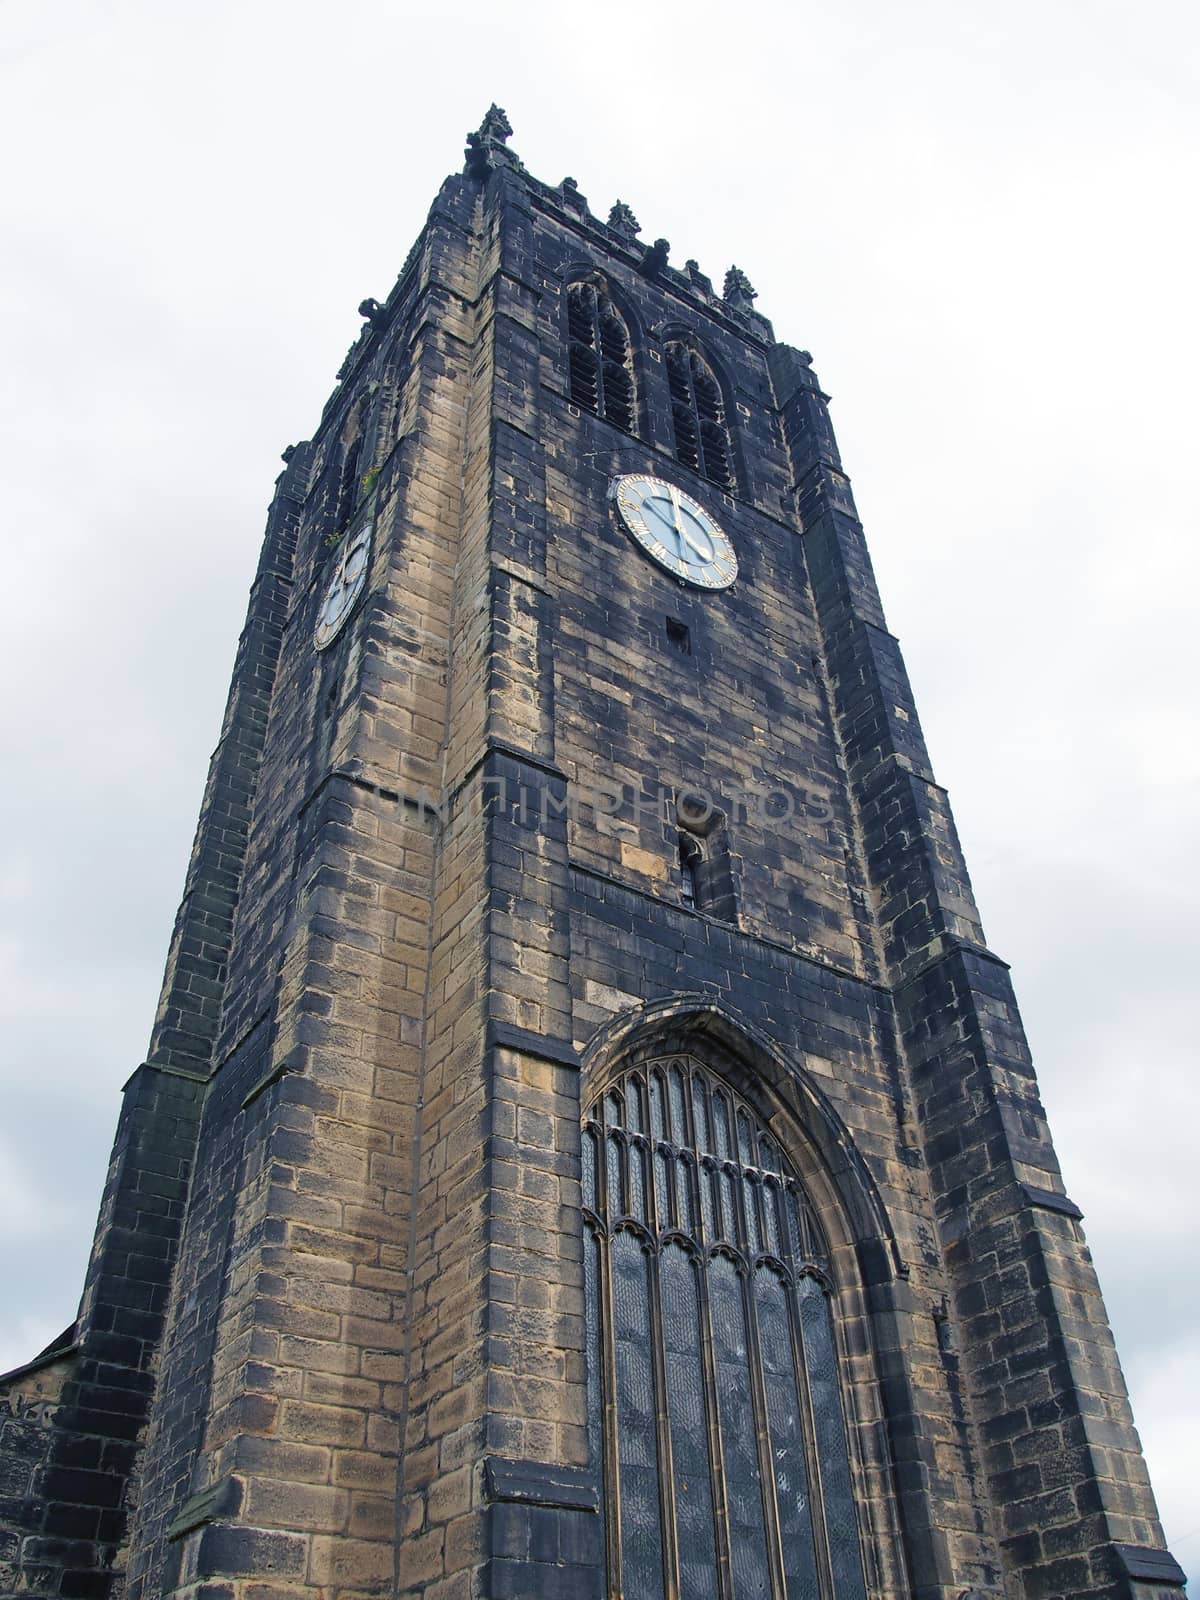 the tower and clock of halifax minster a medieval church in west yorkshire